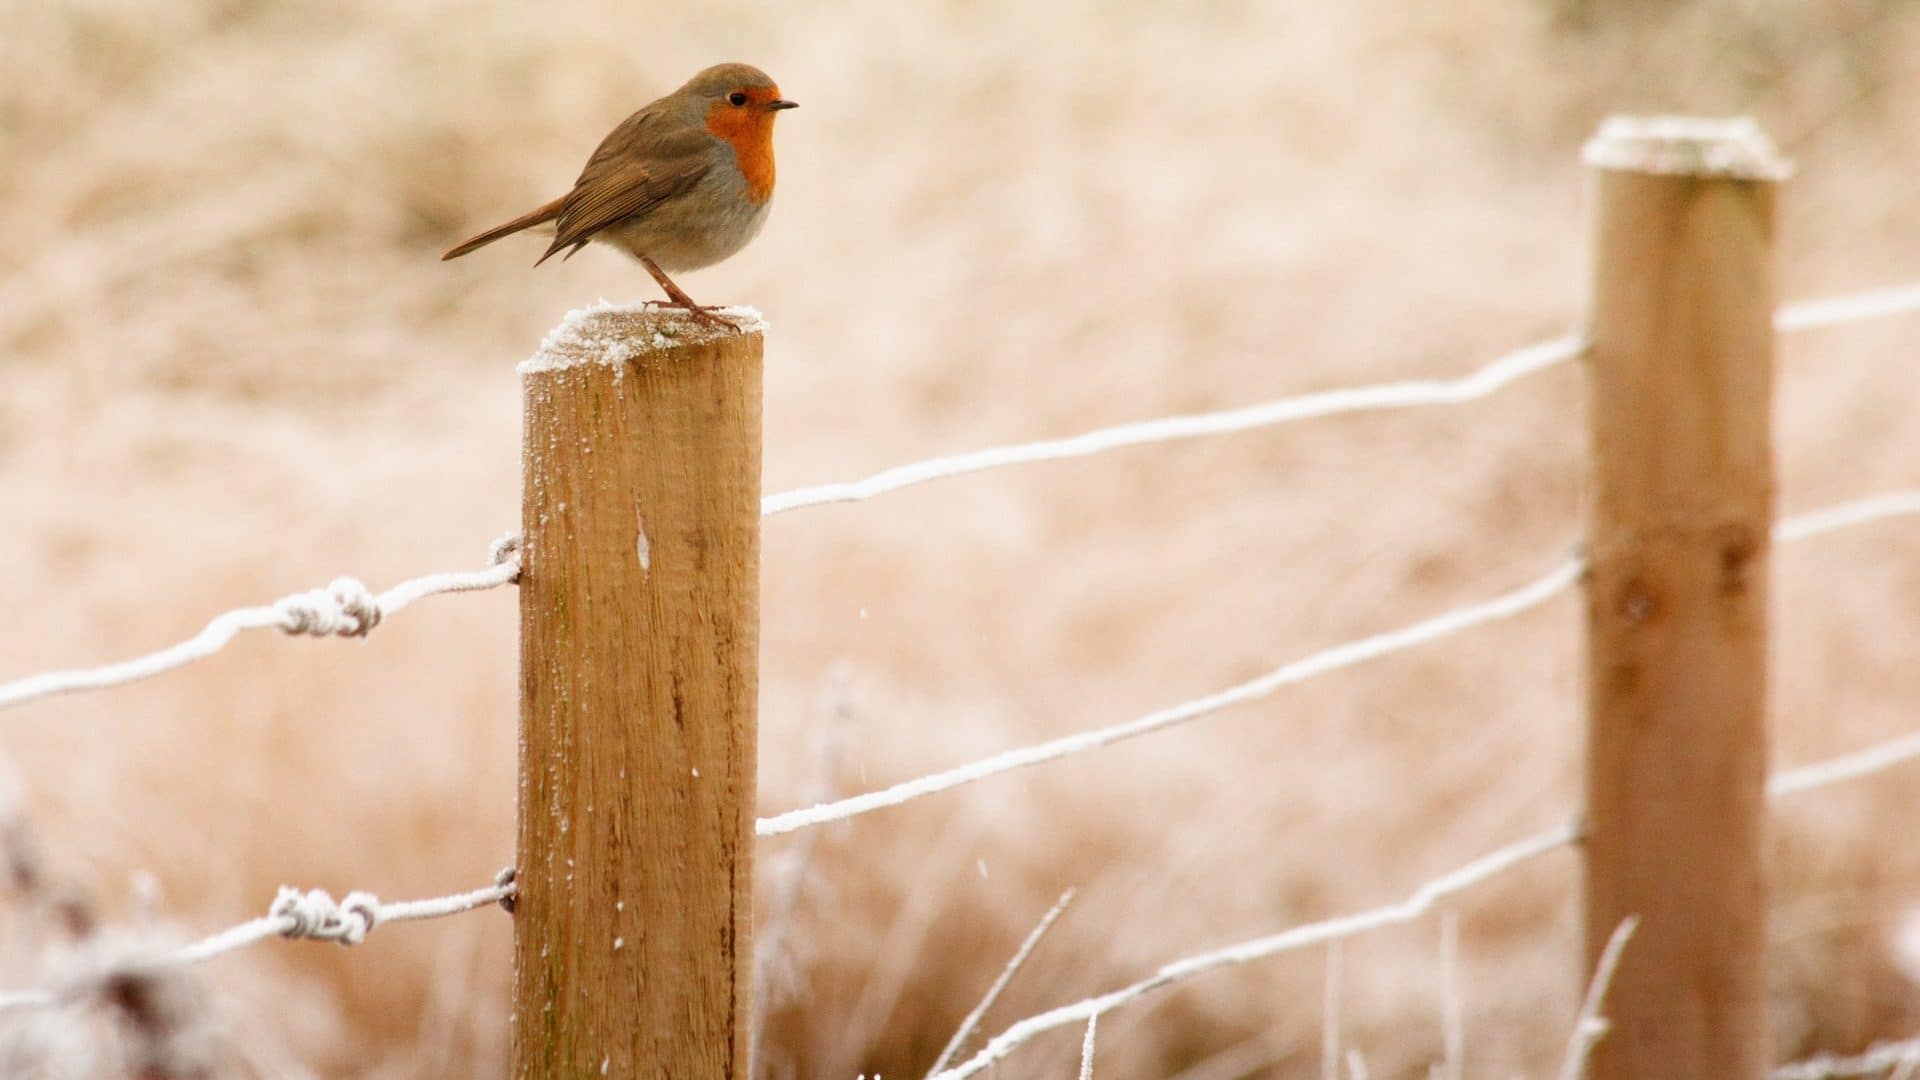 Robin on a fence in winter reading the loyalty newswire.